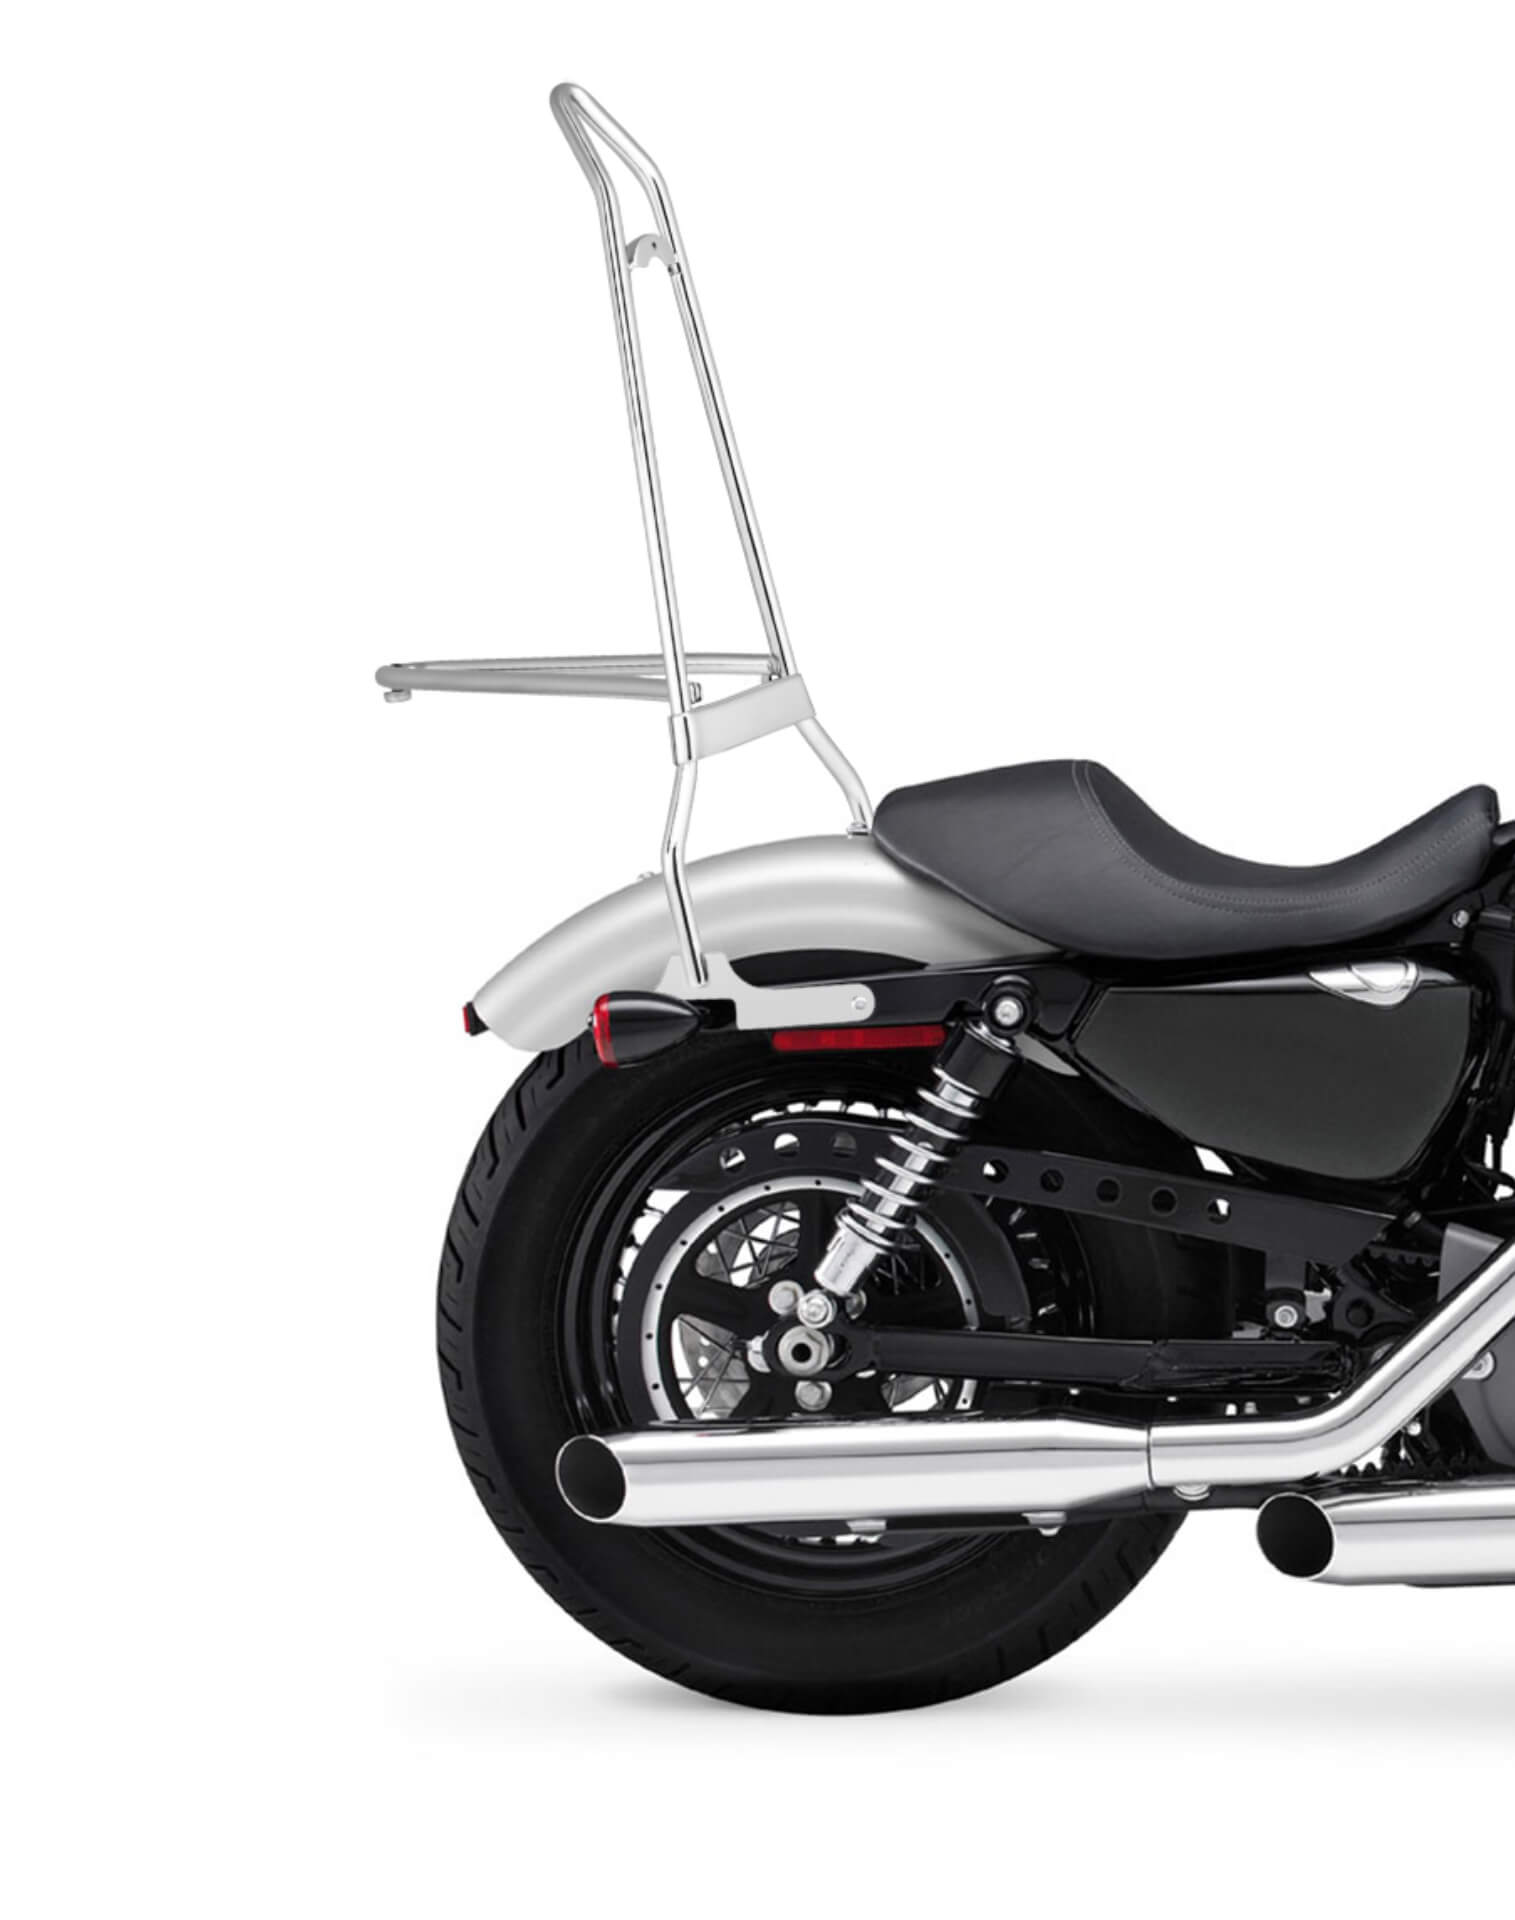 Iron Born Blade 25" Sissy Bar with Foldable Luggage Rack for Harley Sportster 1200 Nightster XL1200N Chrome Close Up View